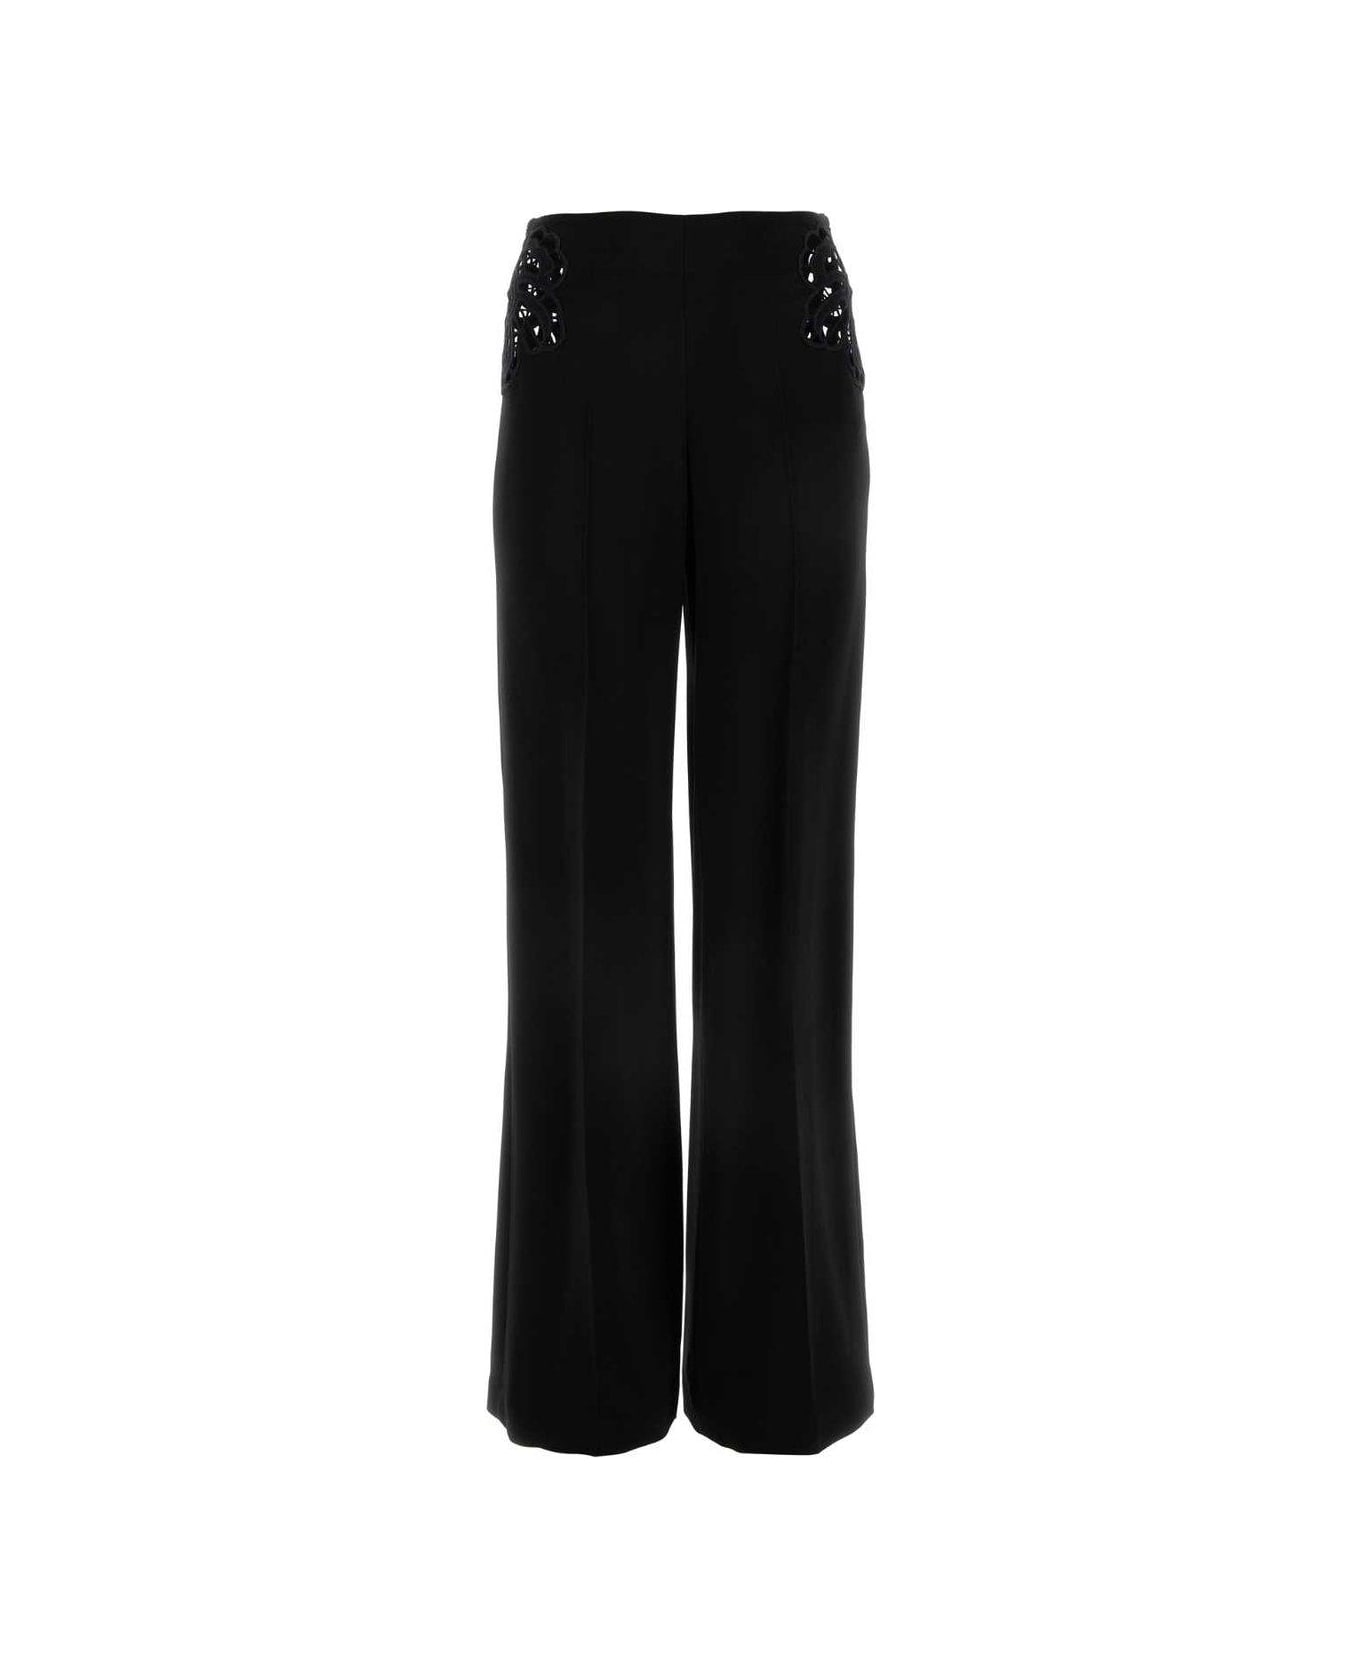 Stella McCartney Broderie-anglaise Tailored Trousers - Black